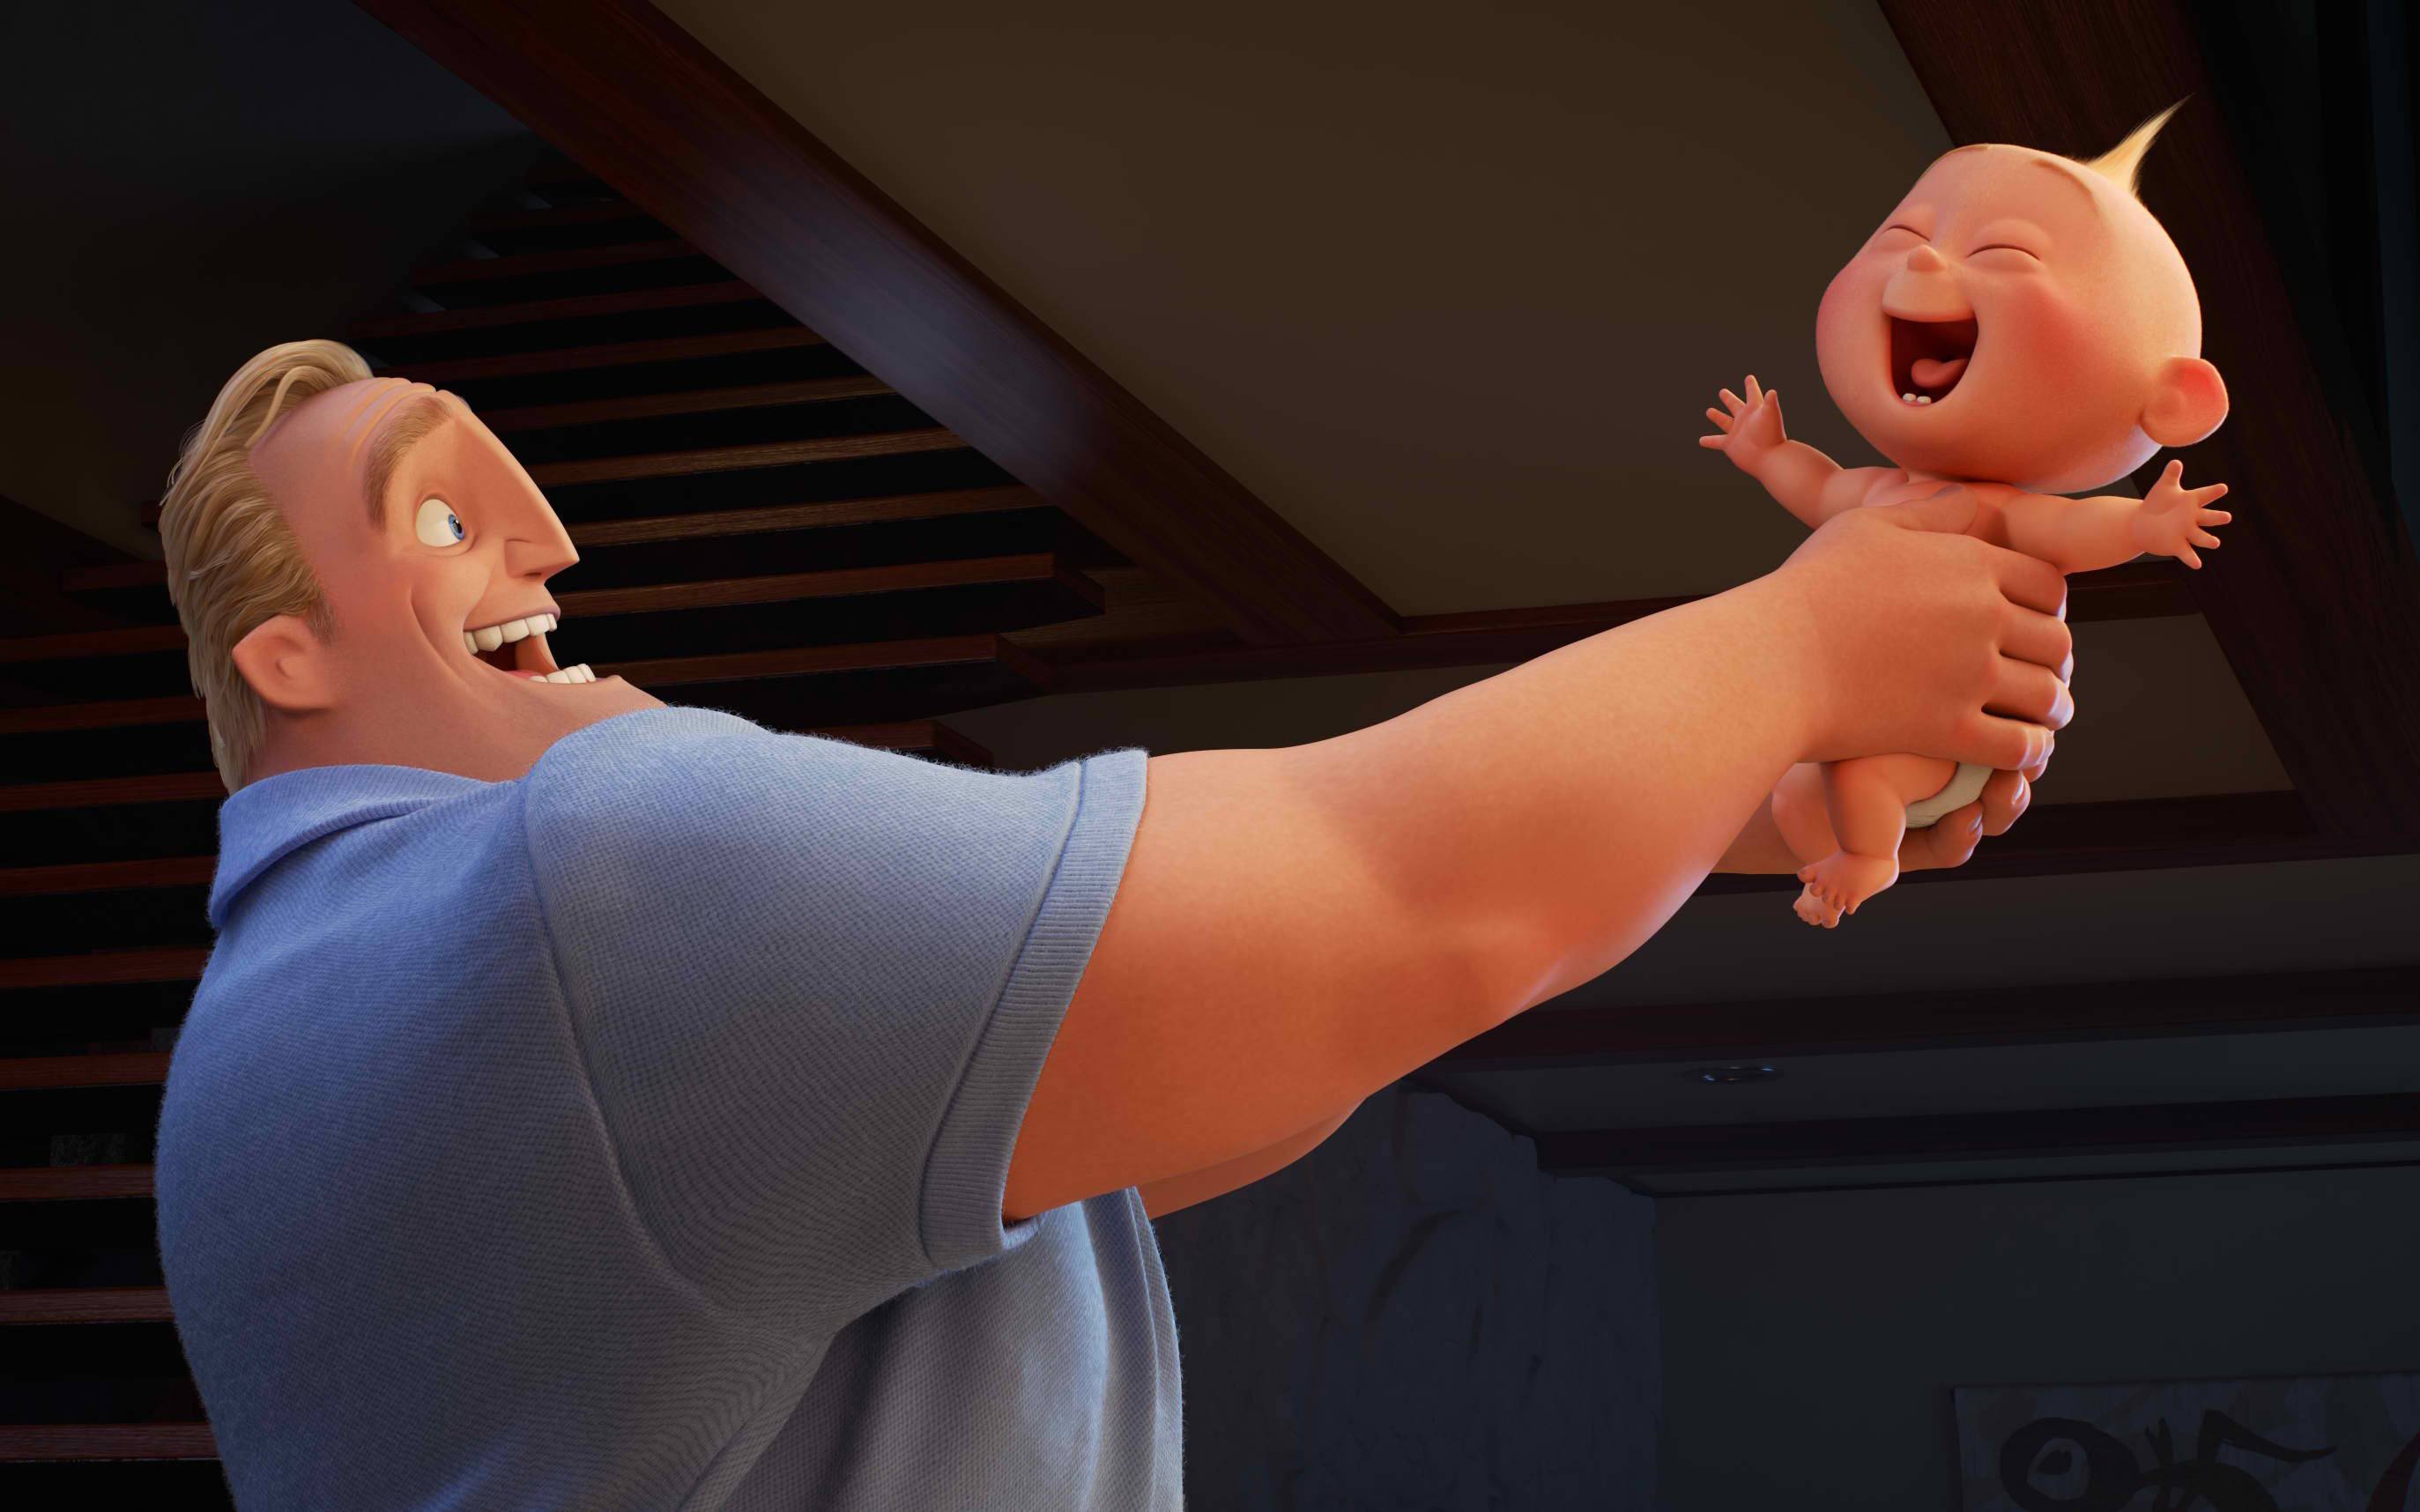 Incredibles 2, Incredible wallpaper, Stunning visuals, Superpowered family, 2750x1720 HD Desktop